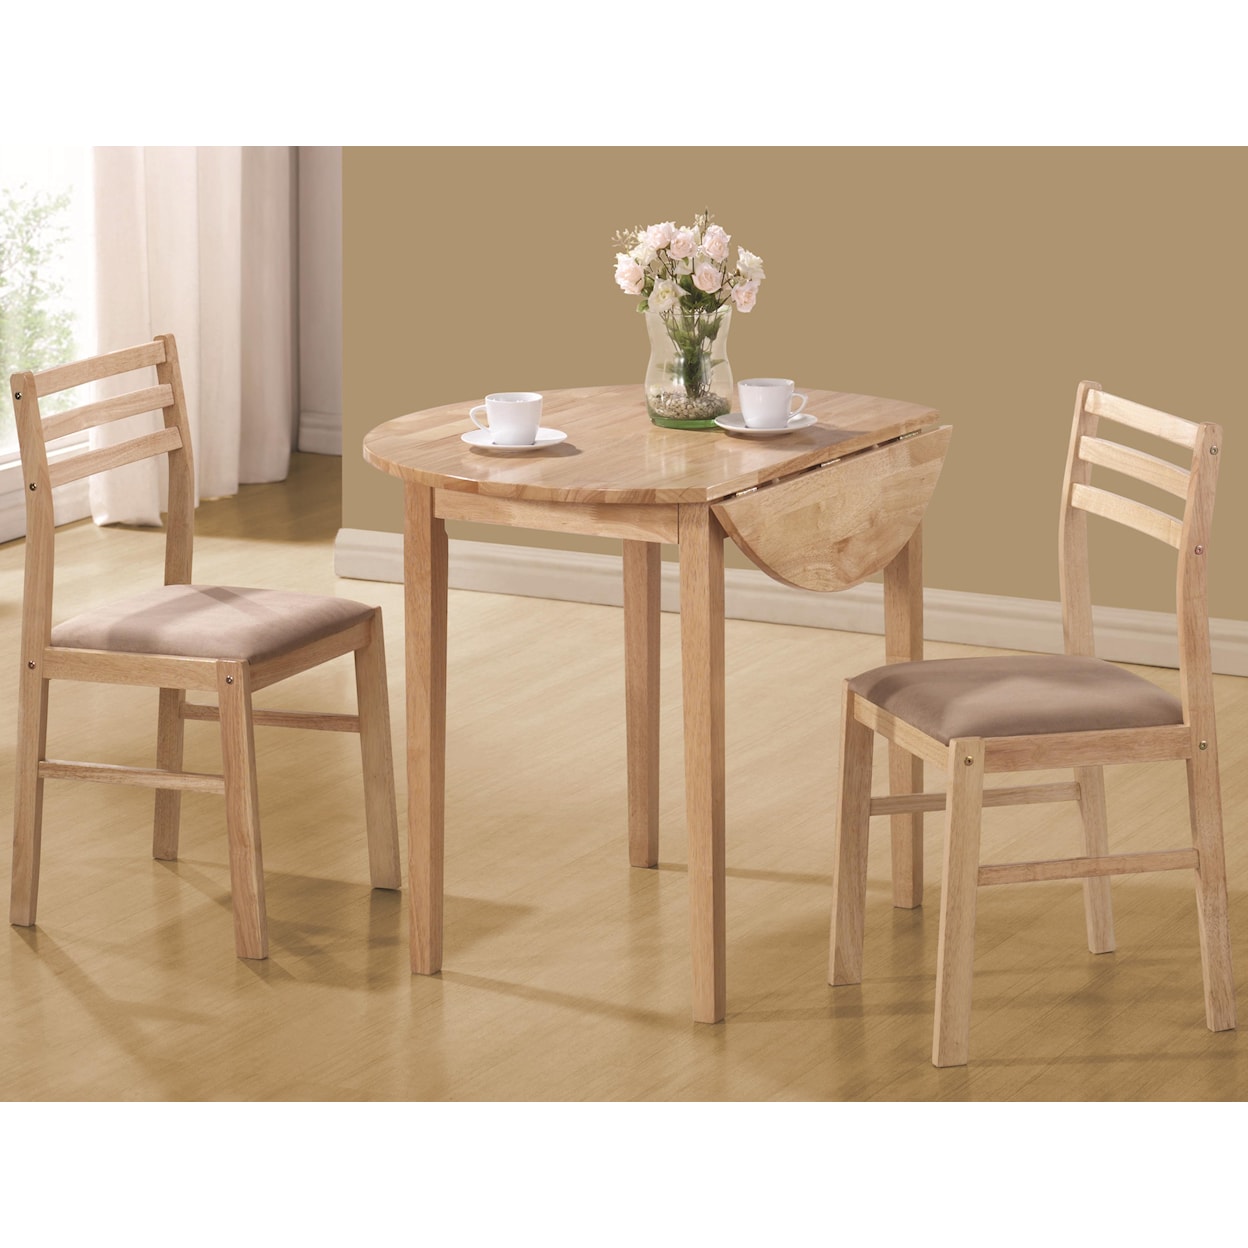 Coaster Dinettes 3 Piece Table & Chair Set